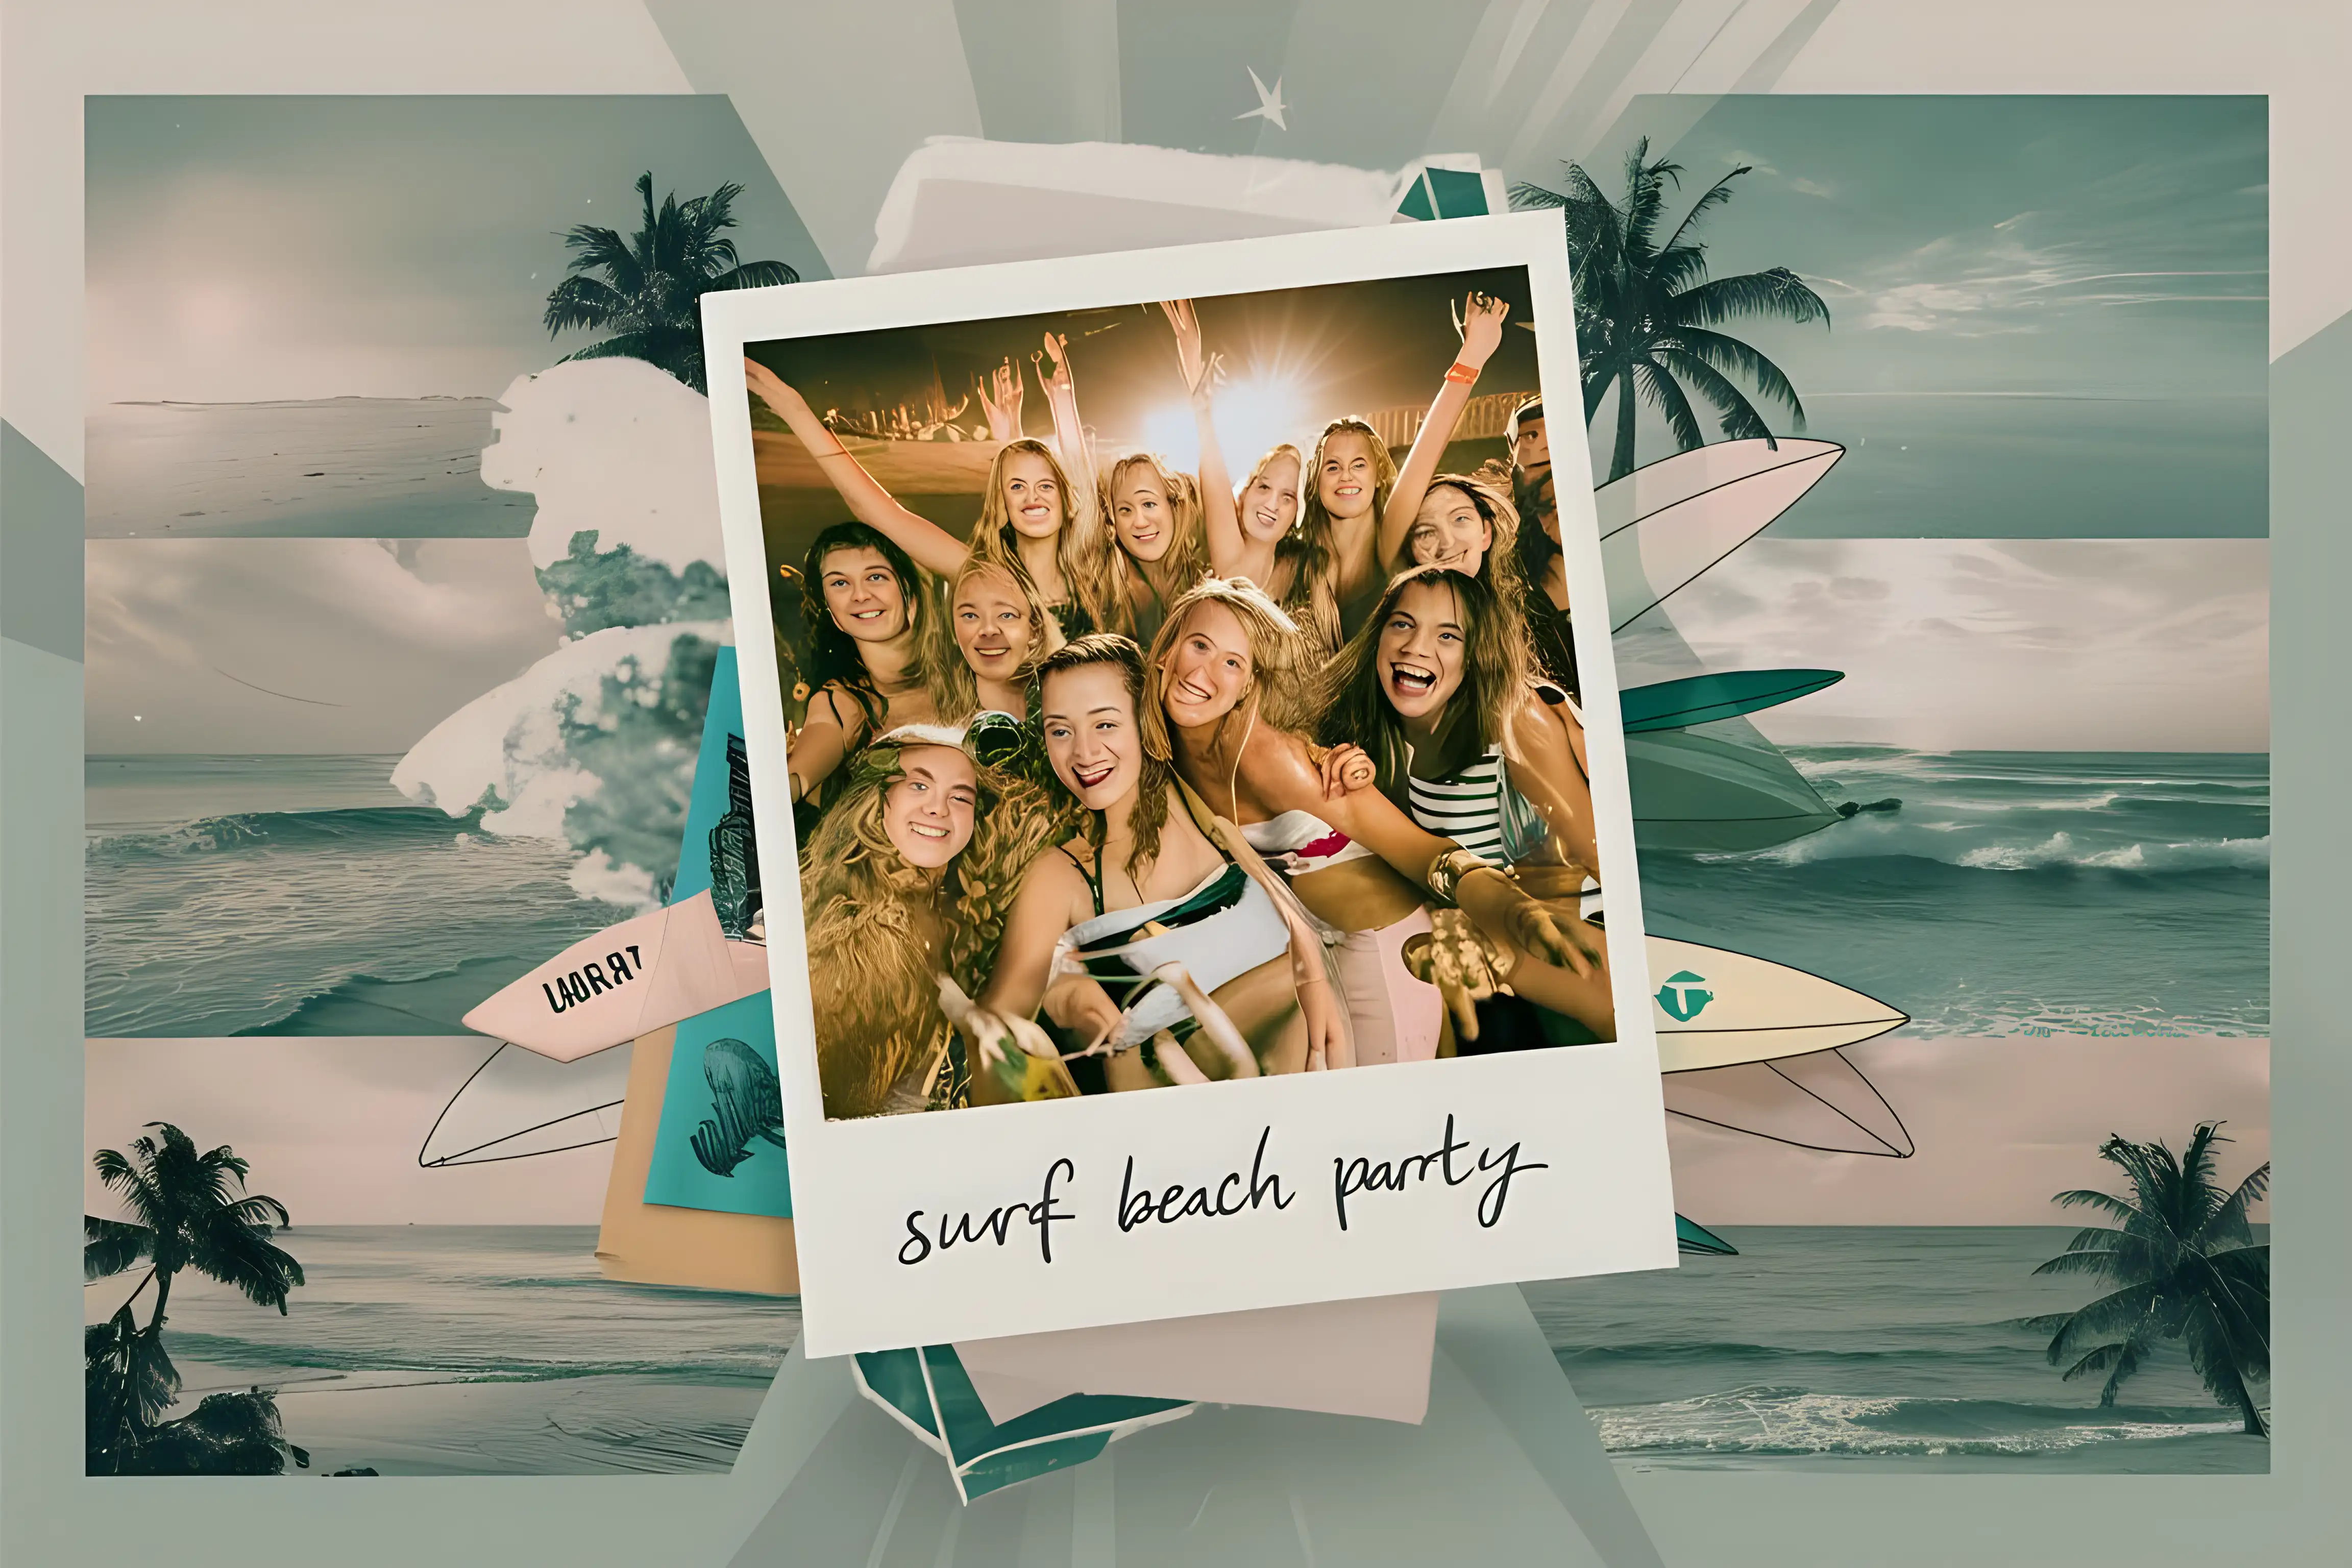 Surfer Beach Party Vibrant Youth Celebration in Pictures